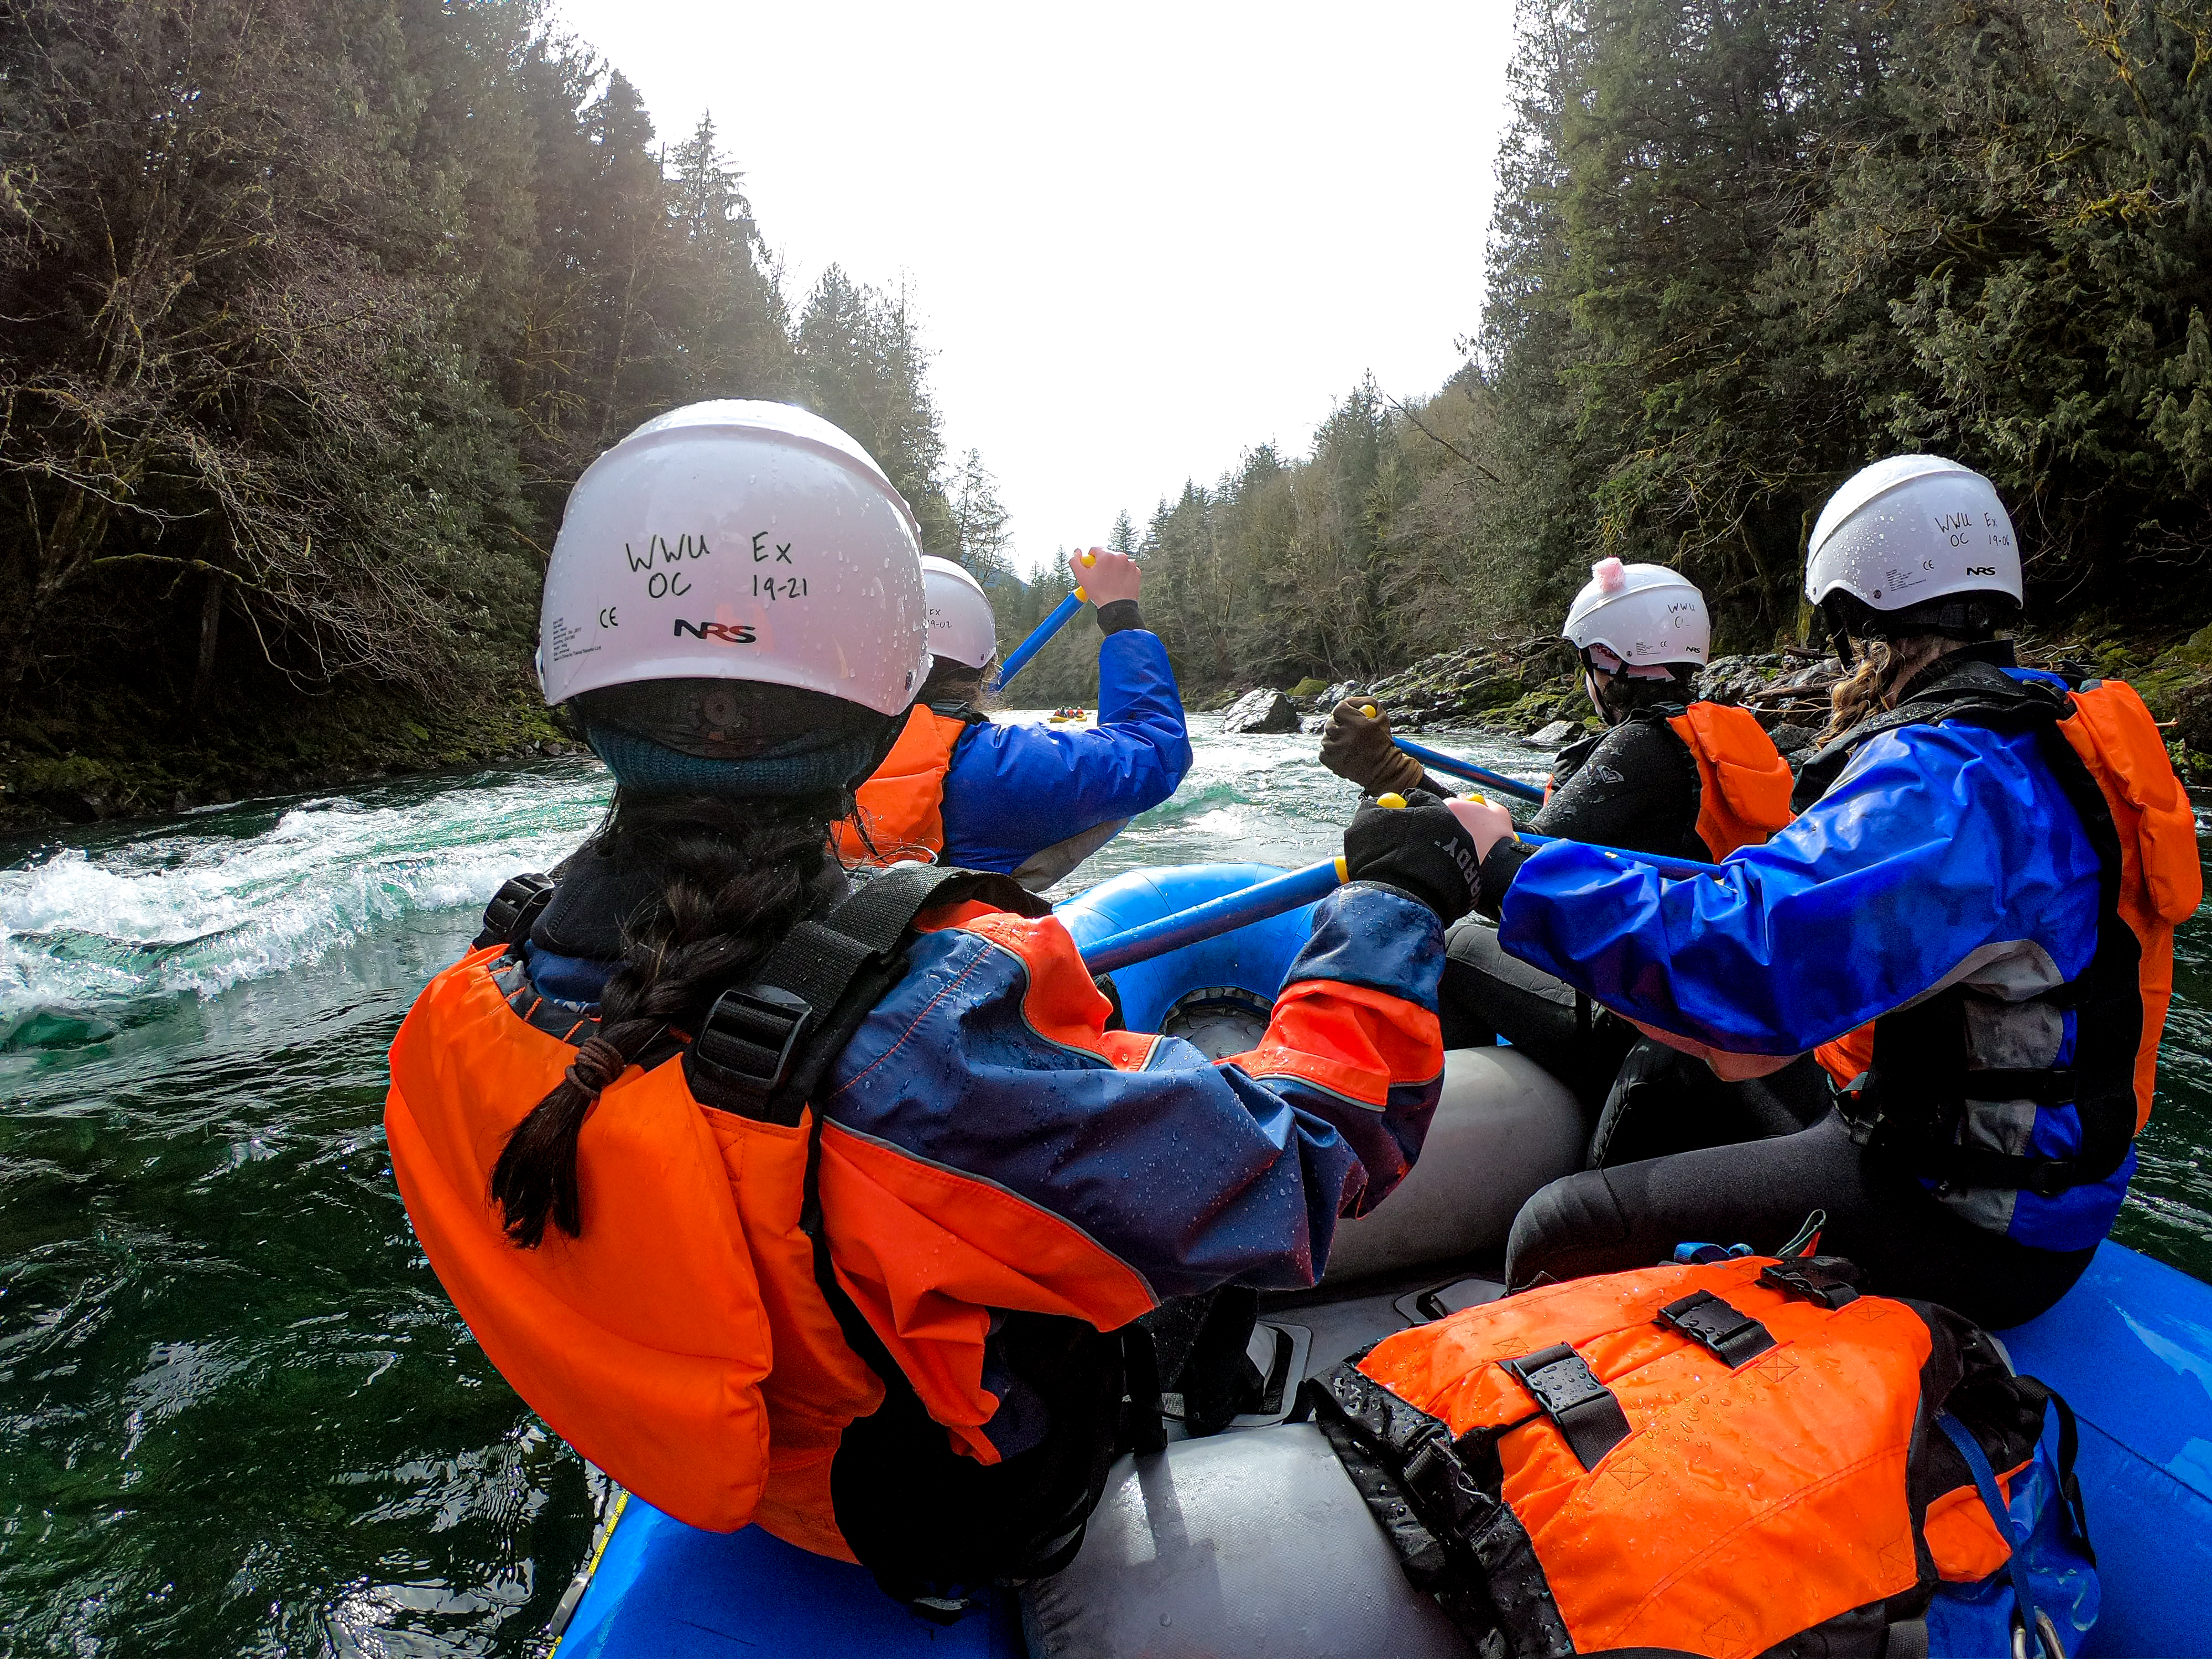 four students wearing helmets, personal flotation devices and waterproof gear paddle an inflatable raft through rapids on the Skagit River